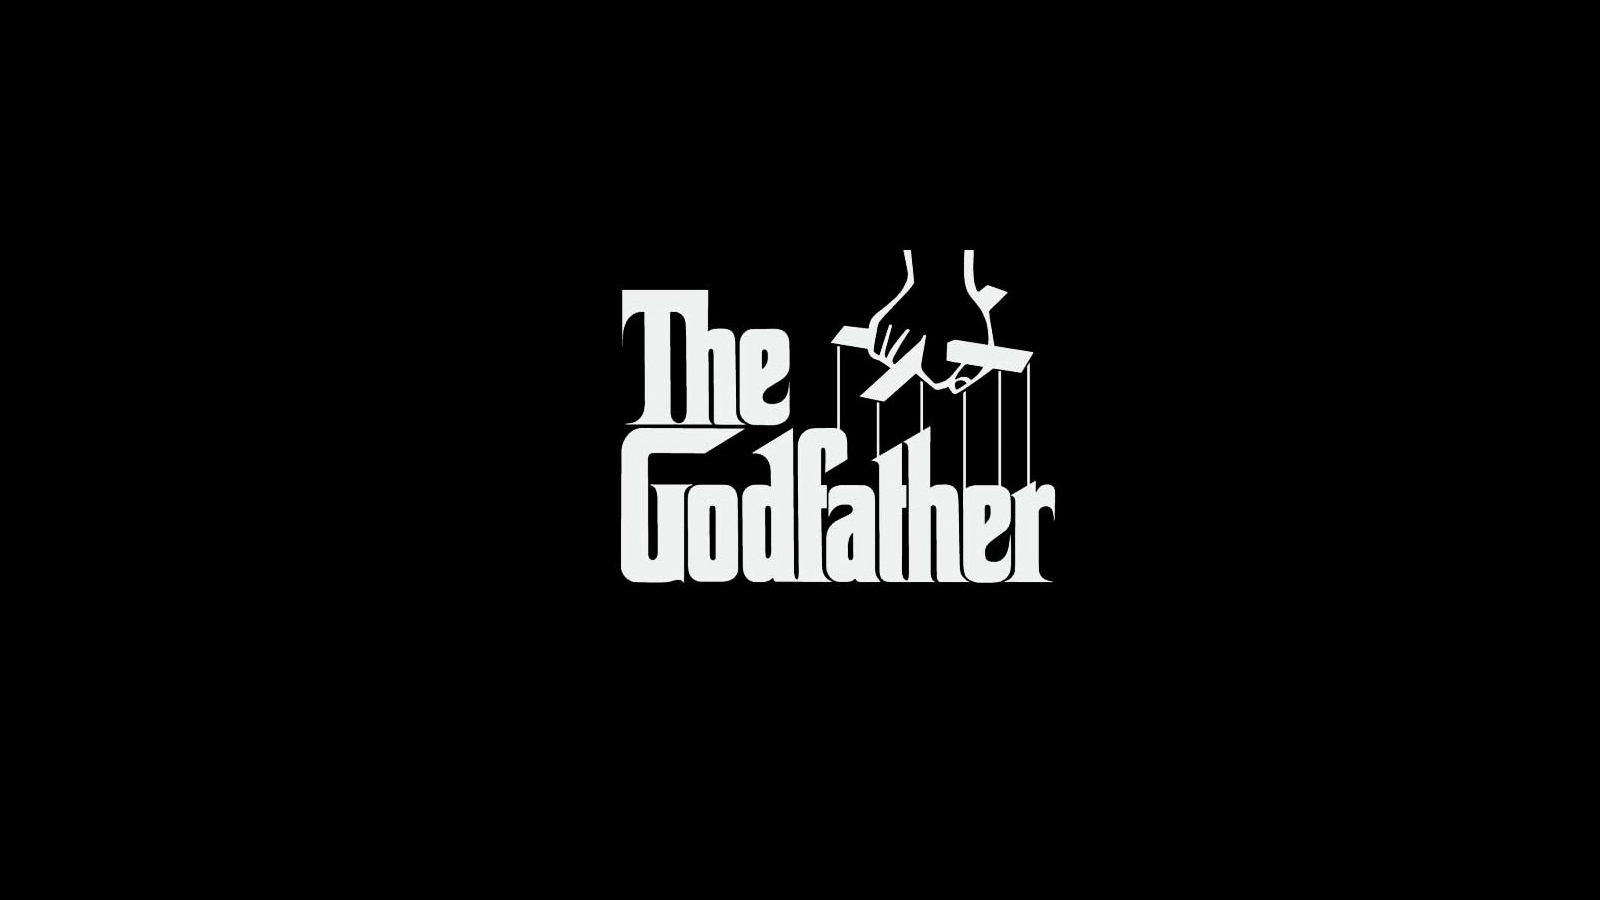 The godfather wallpaper on Pinterest